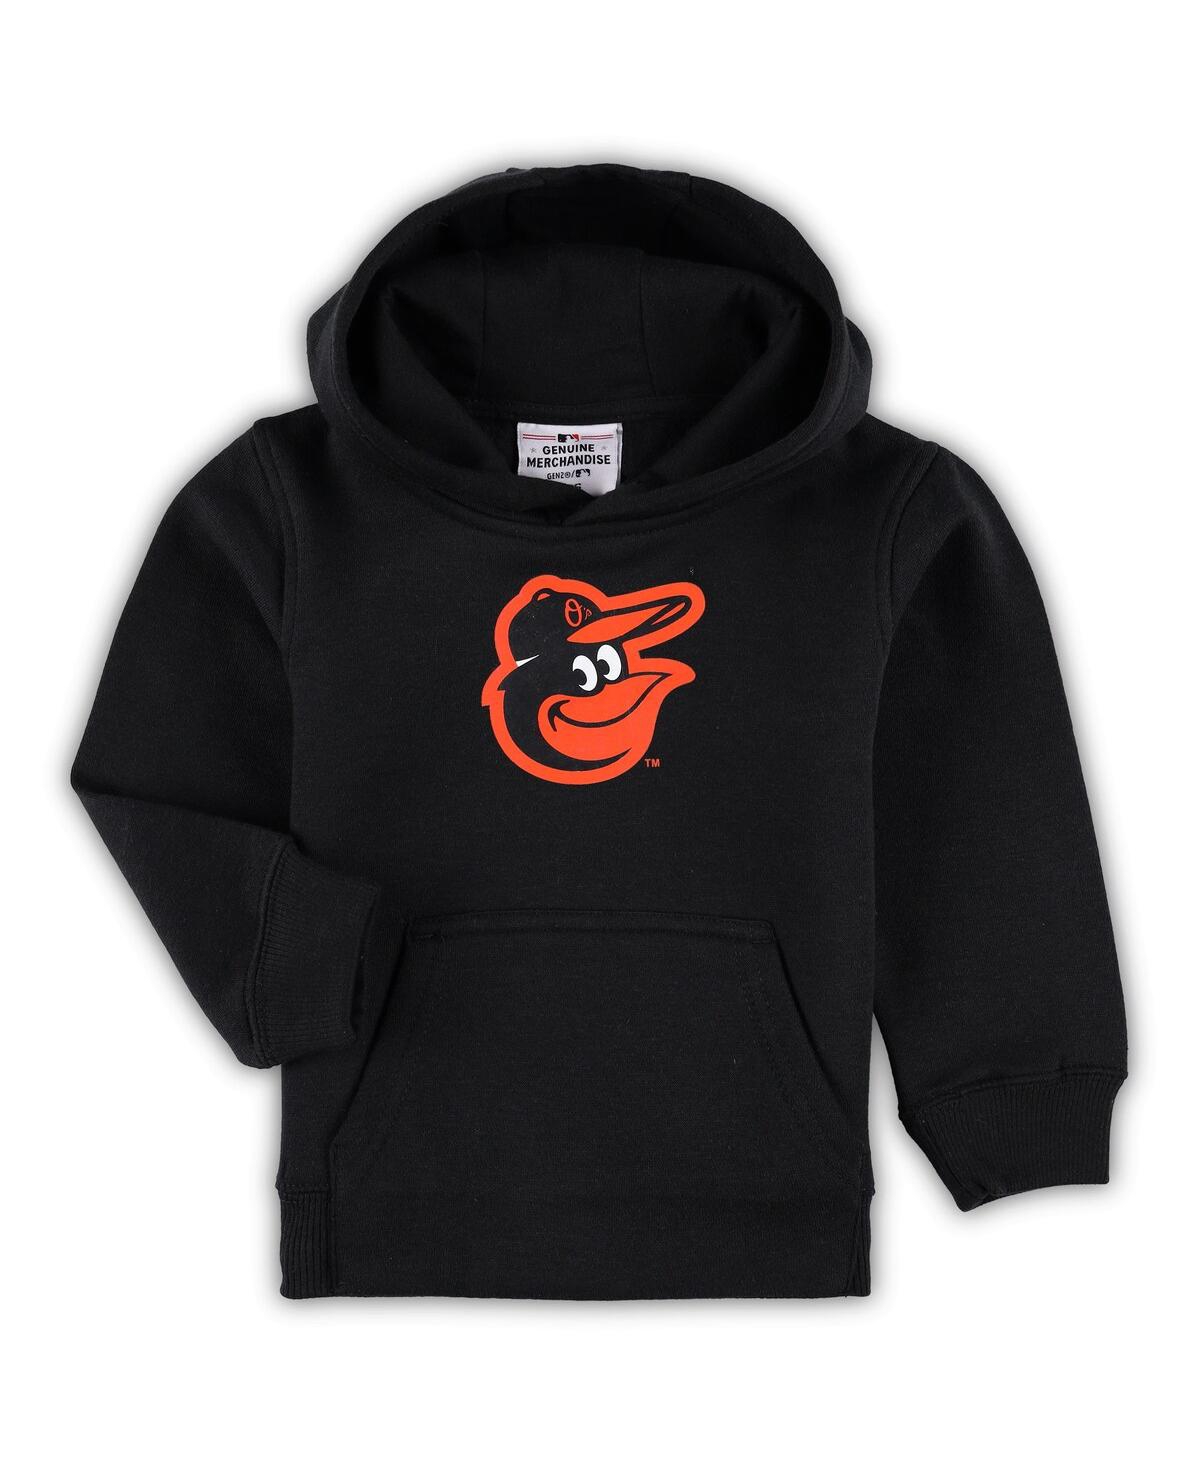 Outerstuff Babies' Toddler Boys And Girls Black Baltimore Orioles Team Primary Logo Fleece Pullover Hoodie